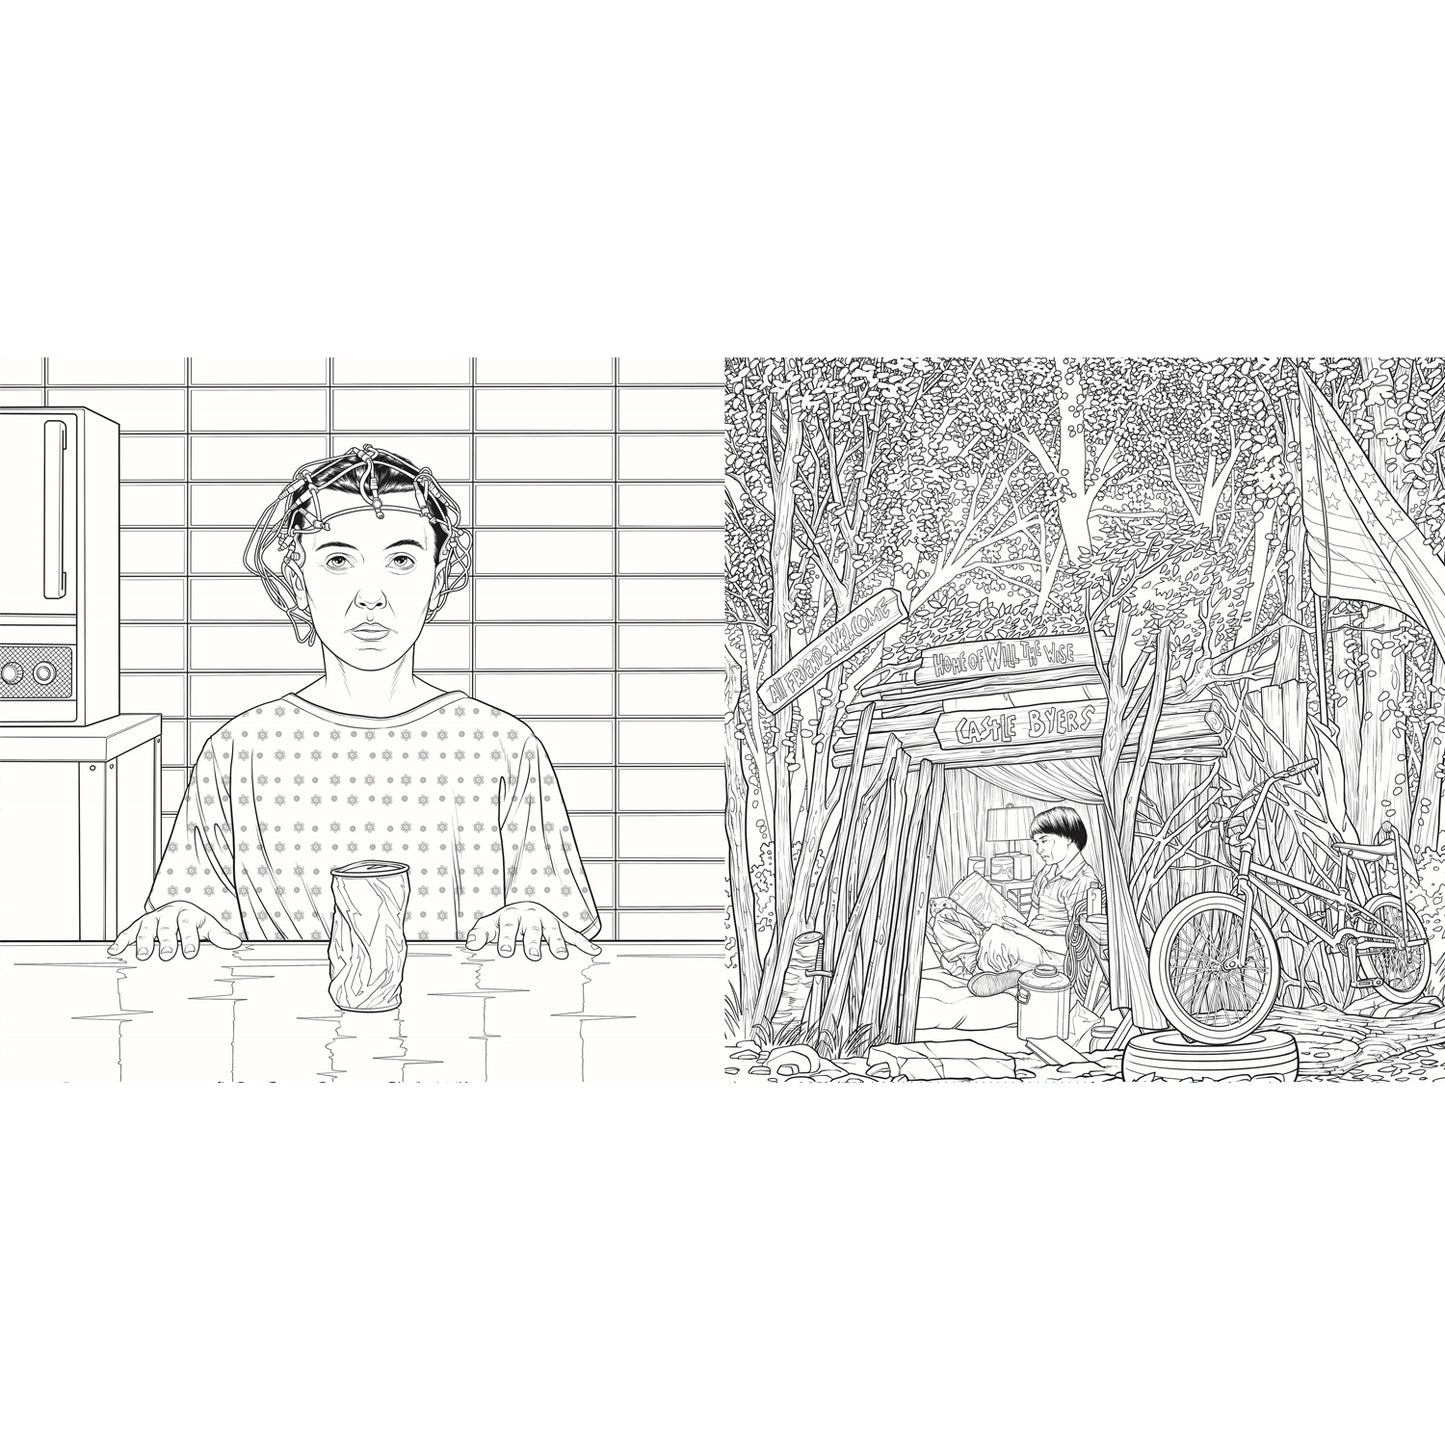 Stranger things. The unofficial colouring book - Libro L'Airone